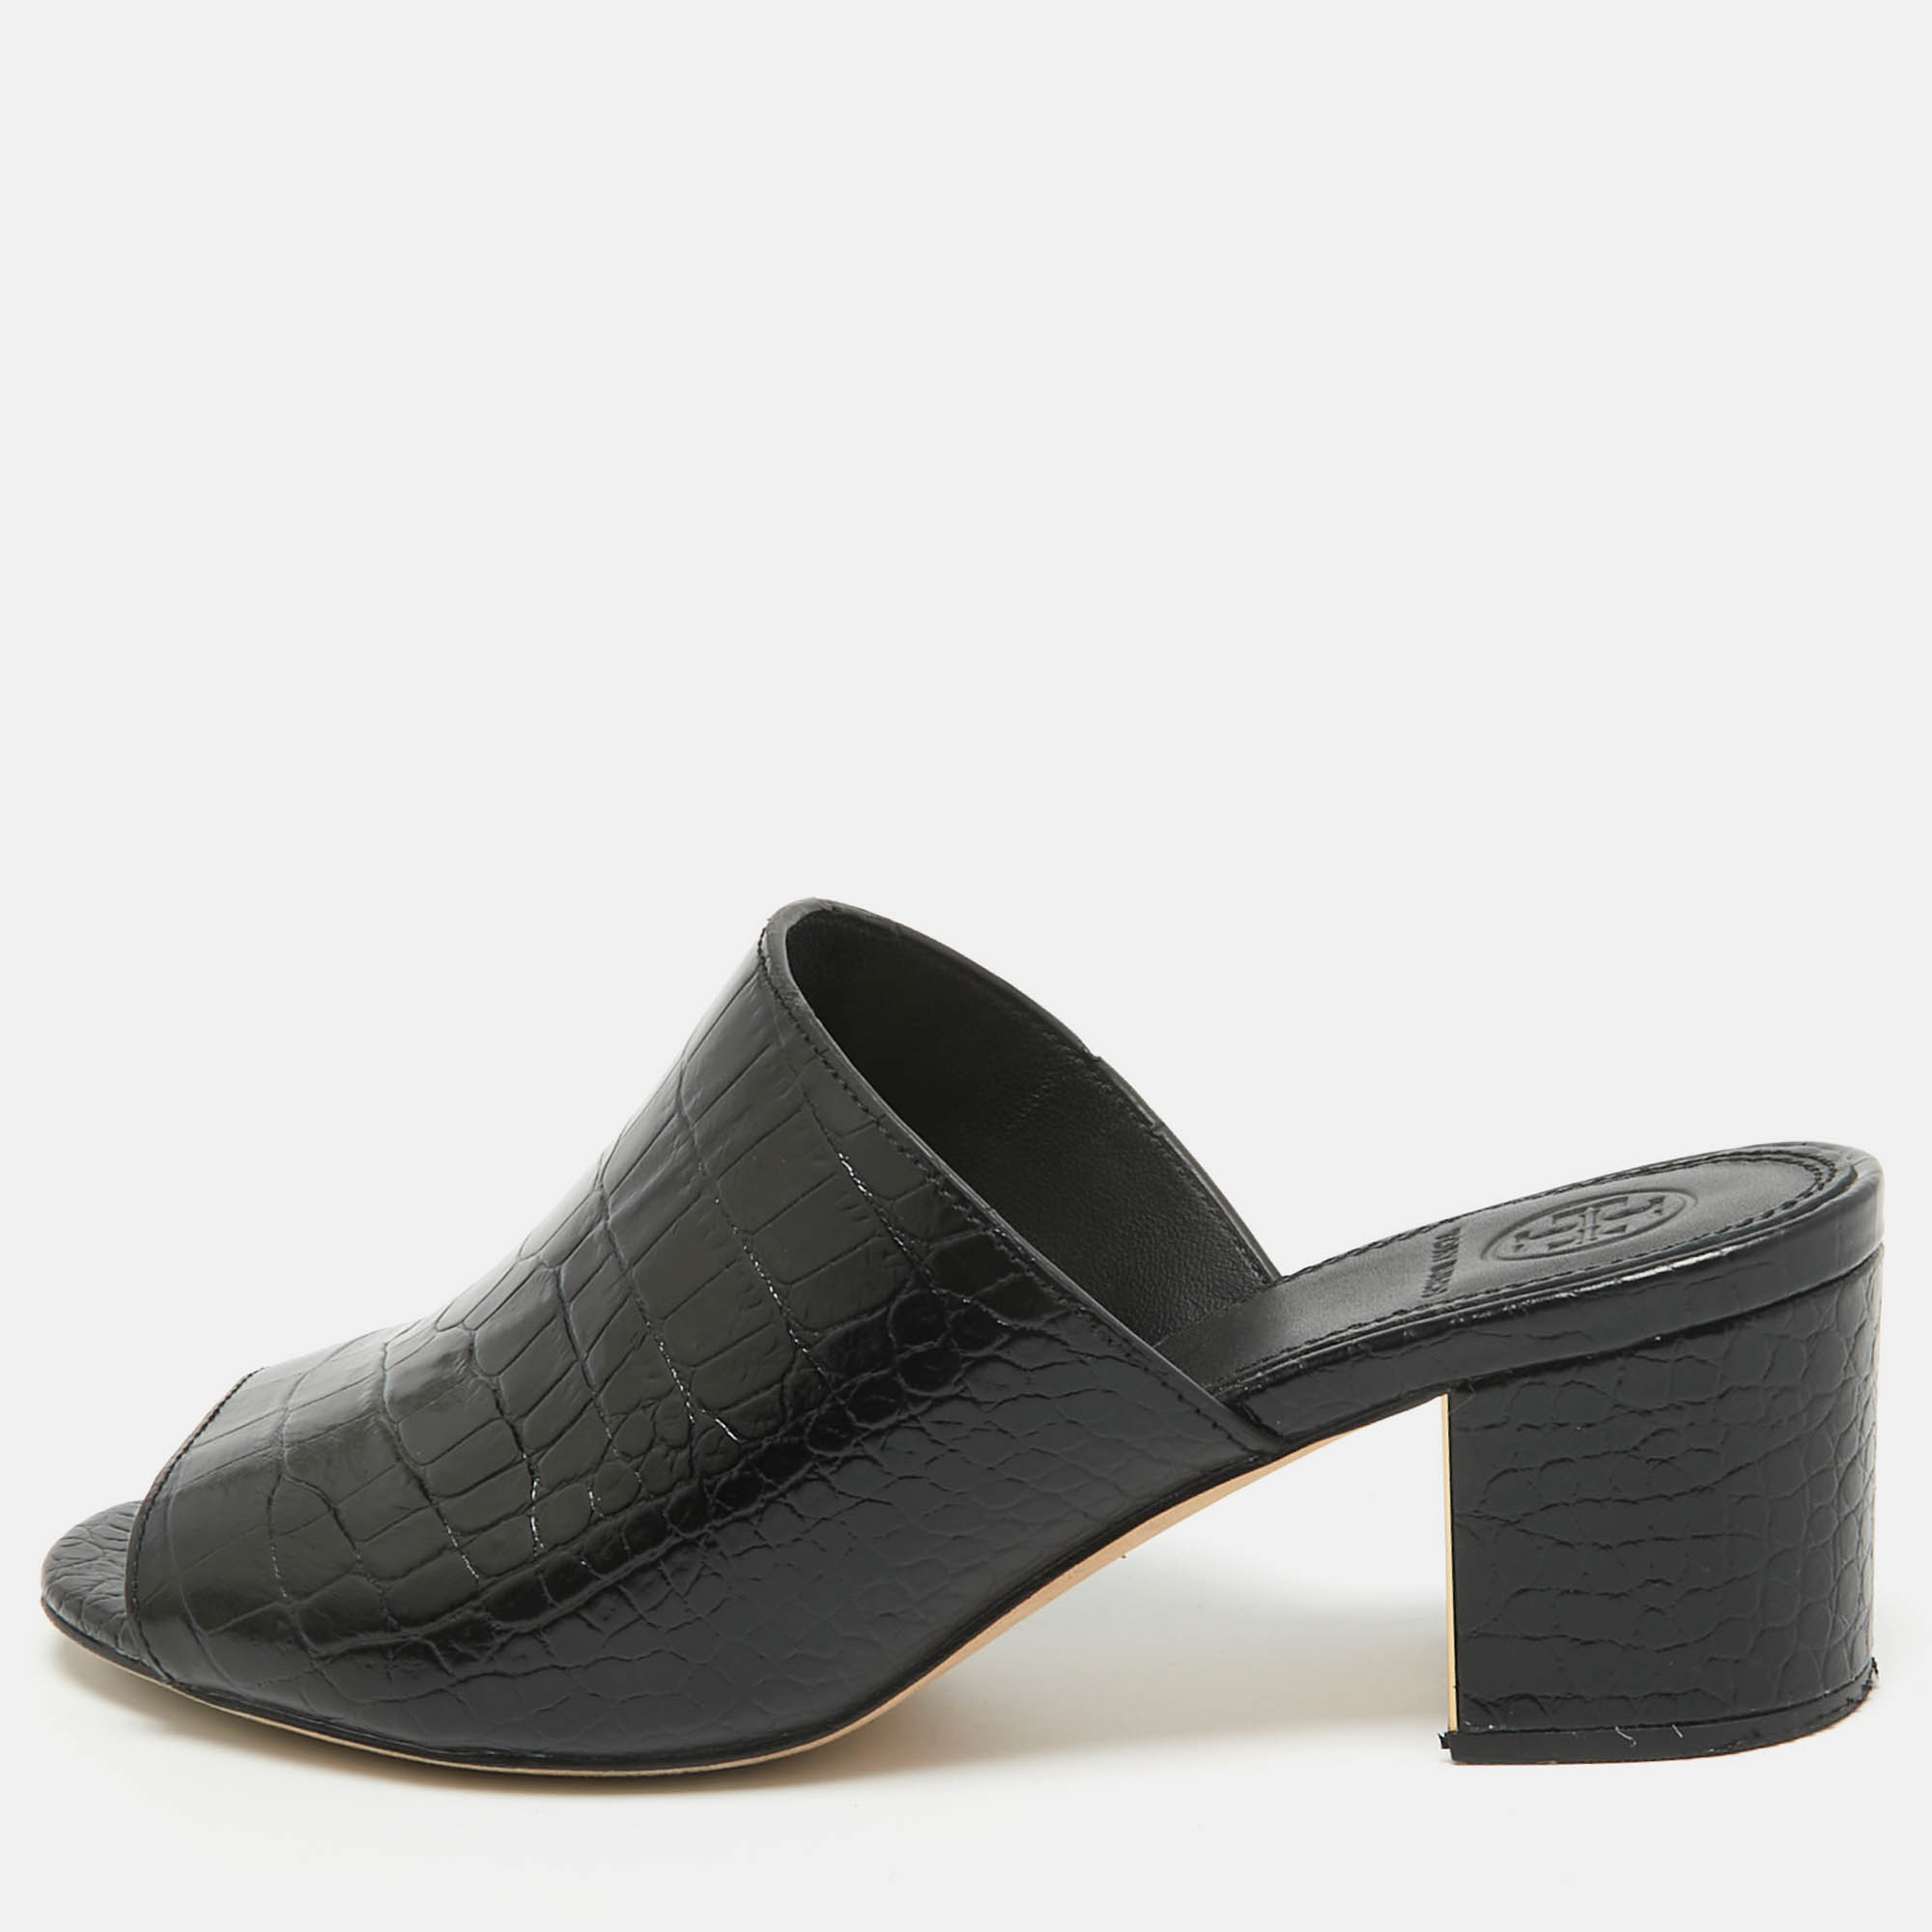 

Tory Burch Black Croc Embossed Leather Mules Size